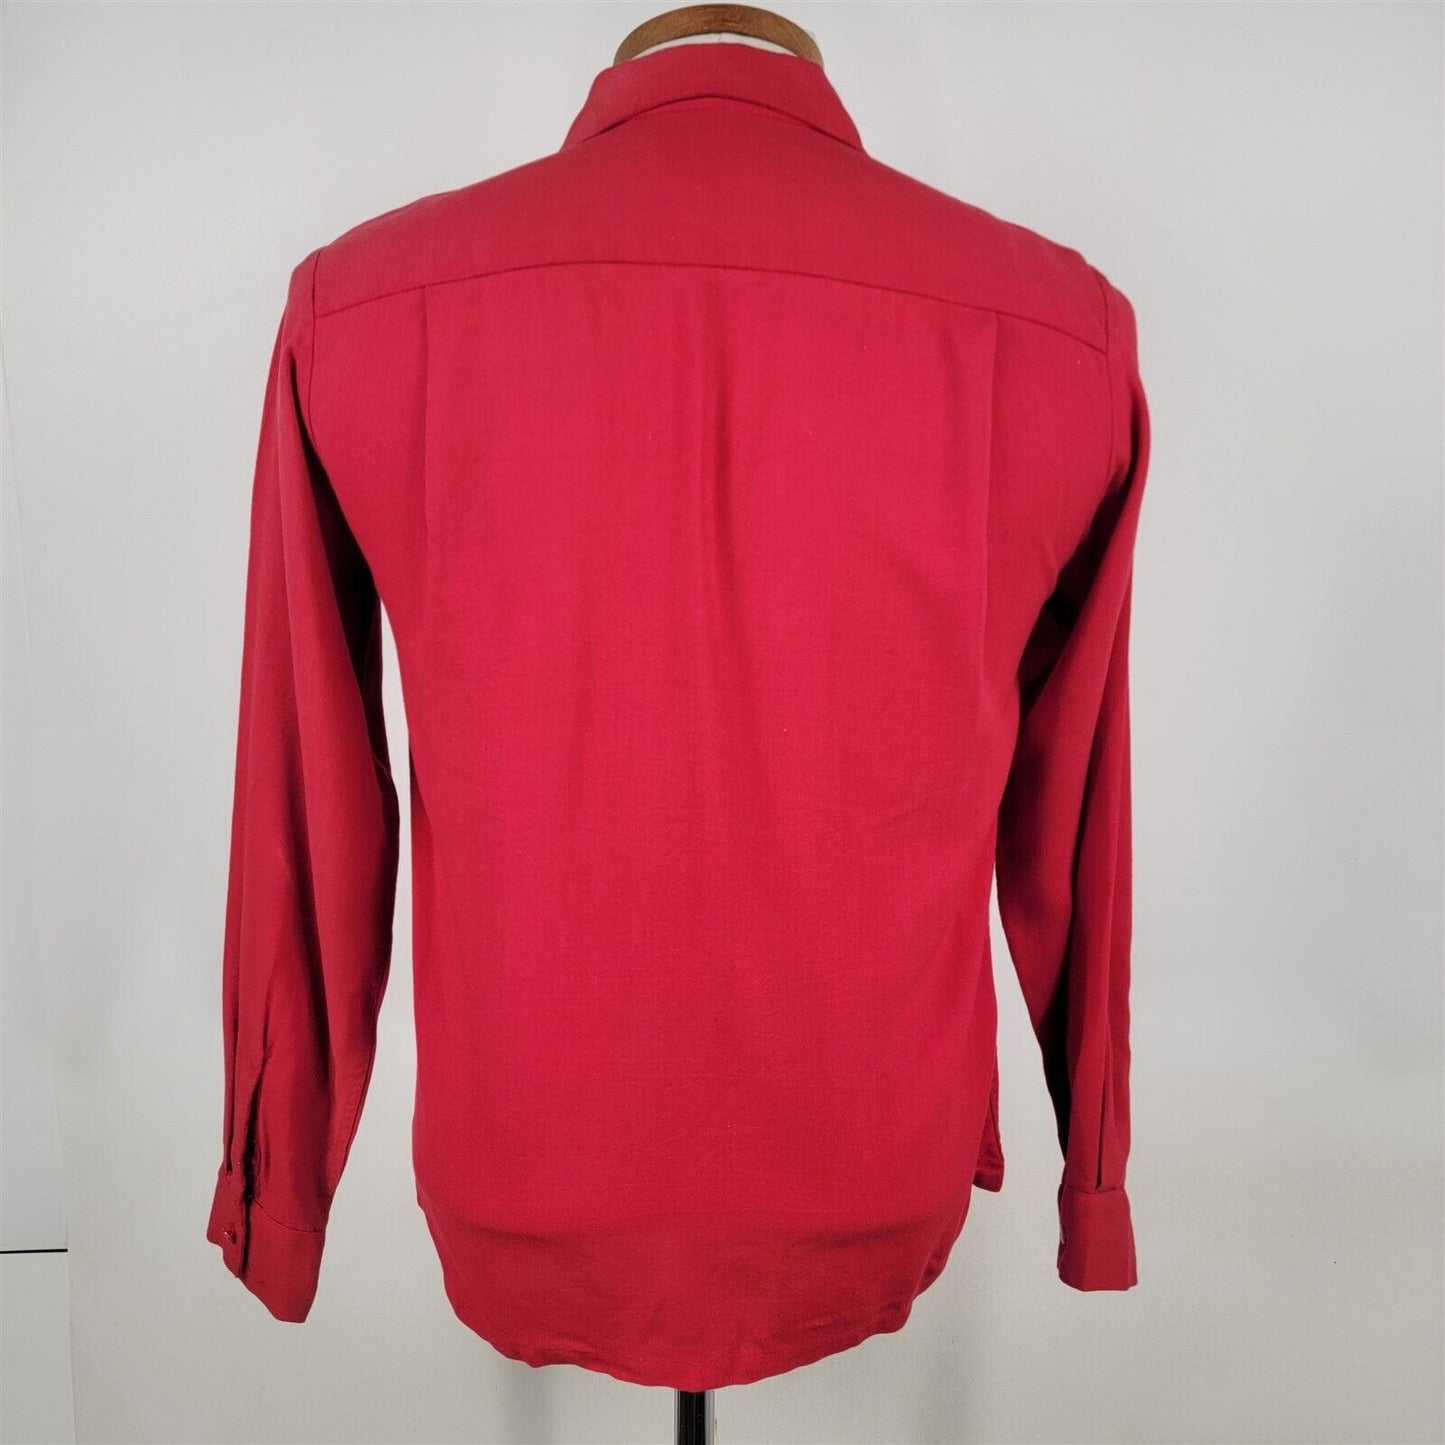 Vintage Da Vinci CA Red Long Sleeve Button Loop Collared Shirt Mens Size S